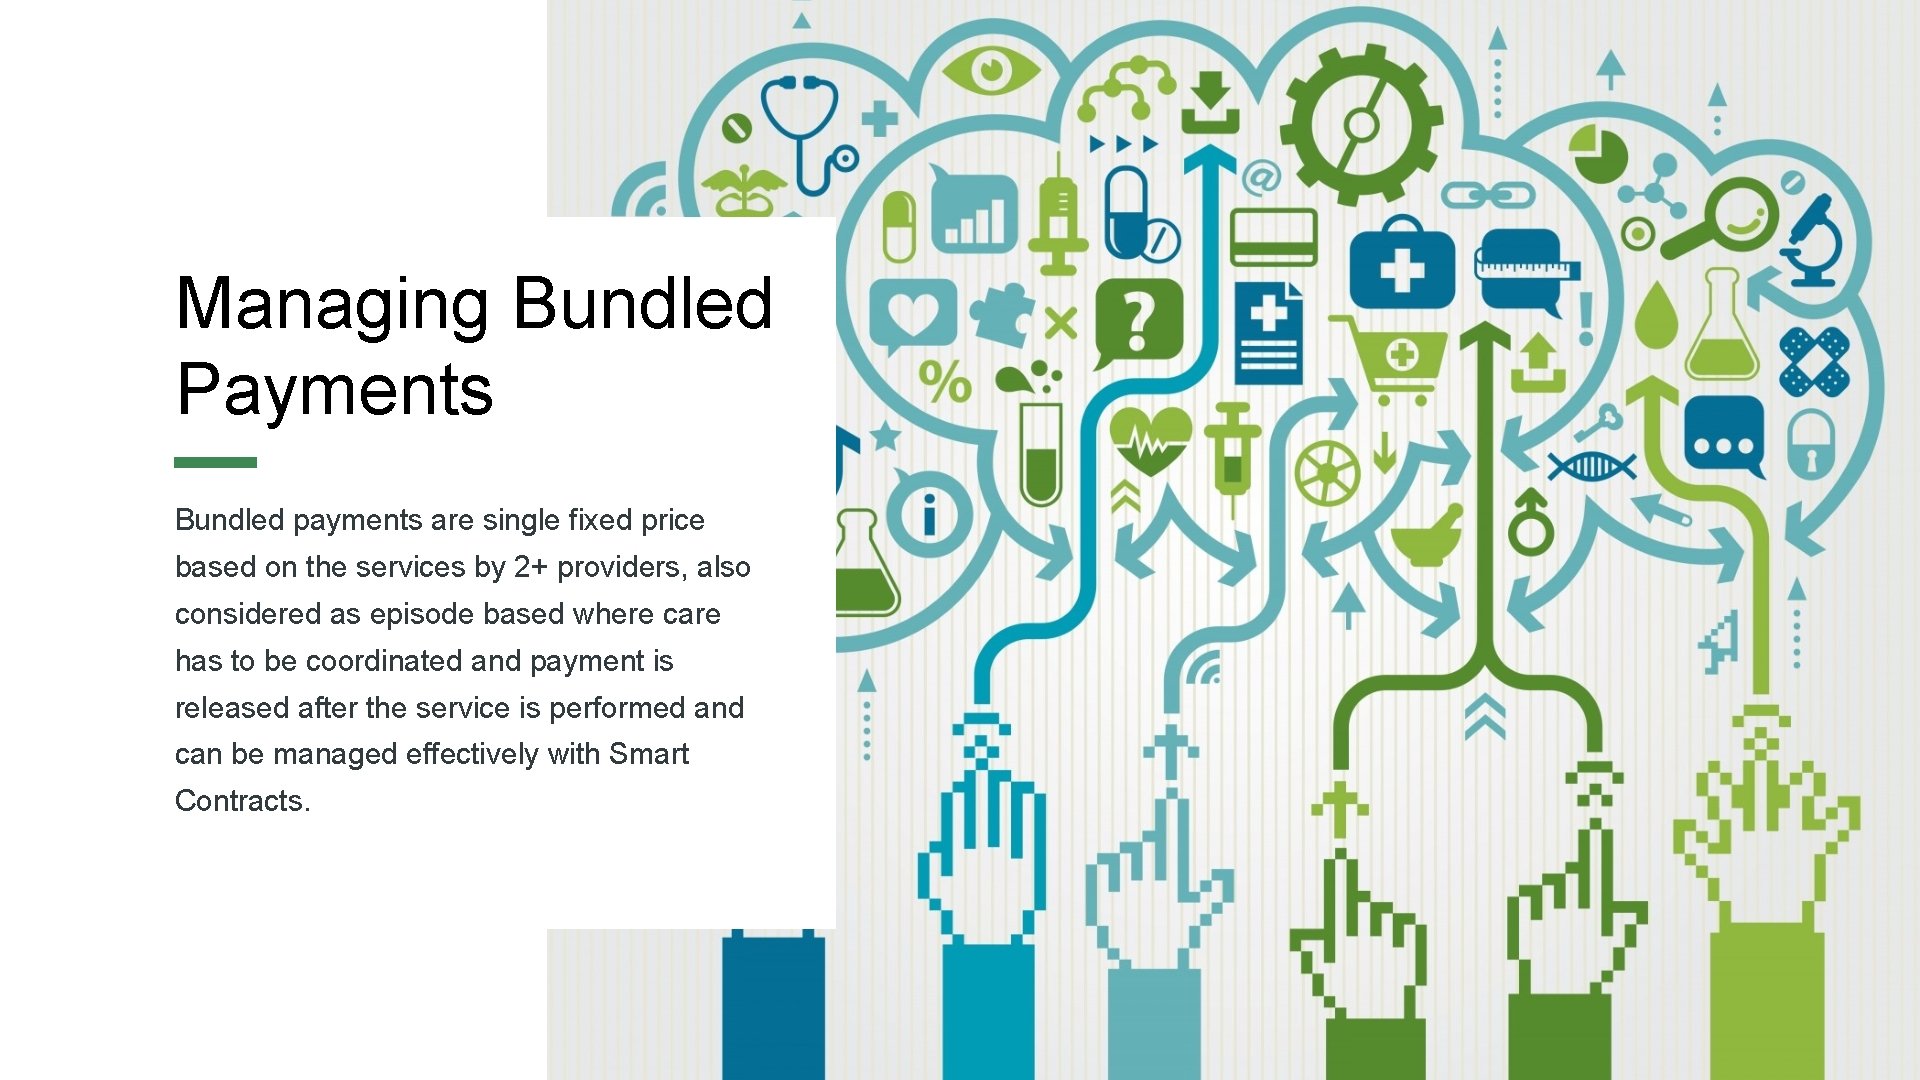 13 Managing Bundled Payments Bundled payments are single fixed price based on the services